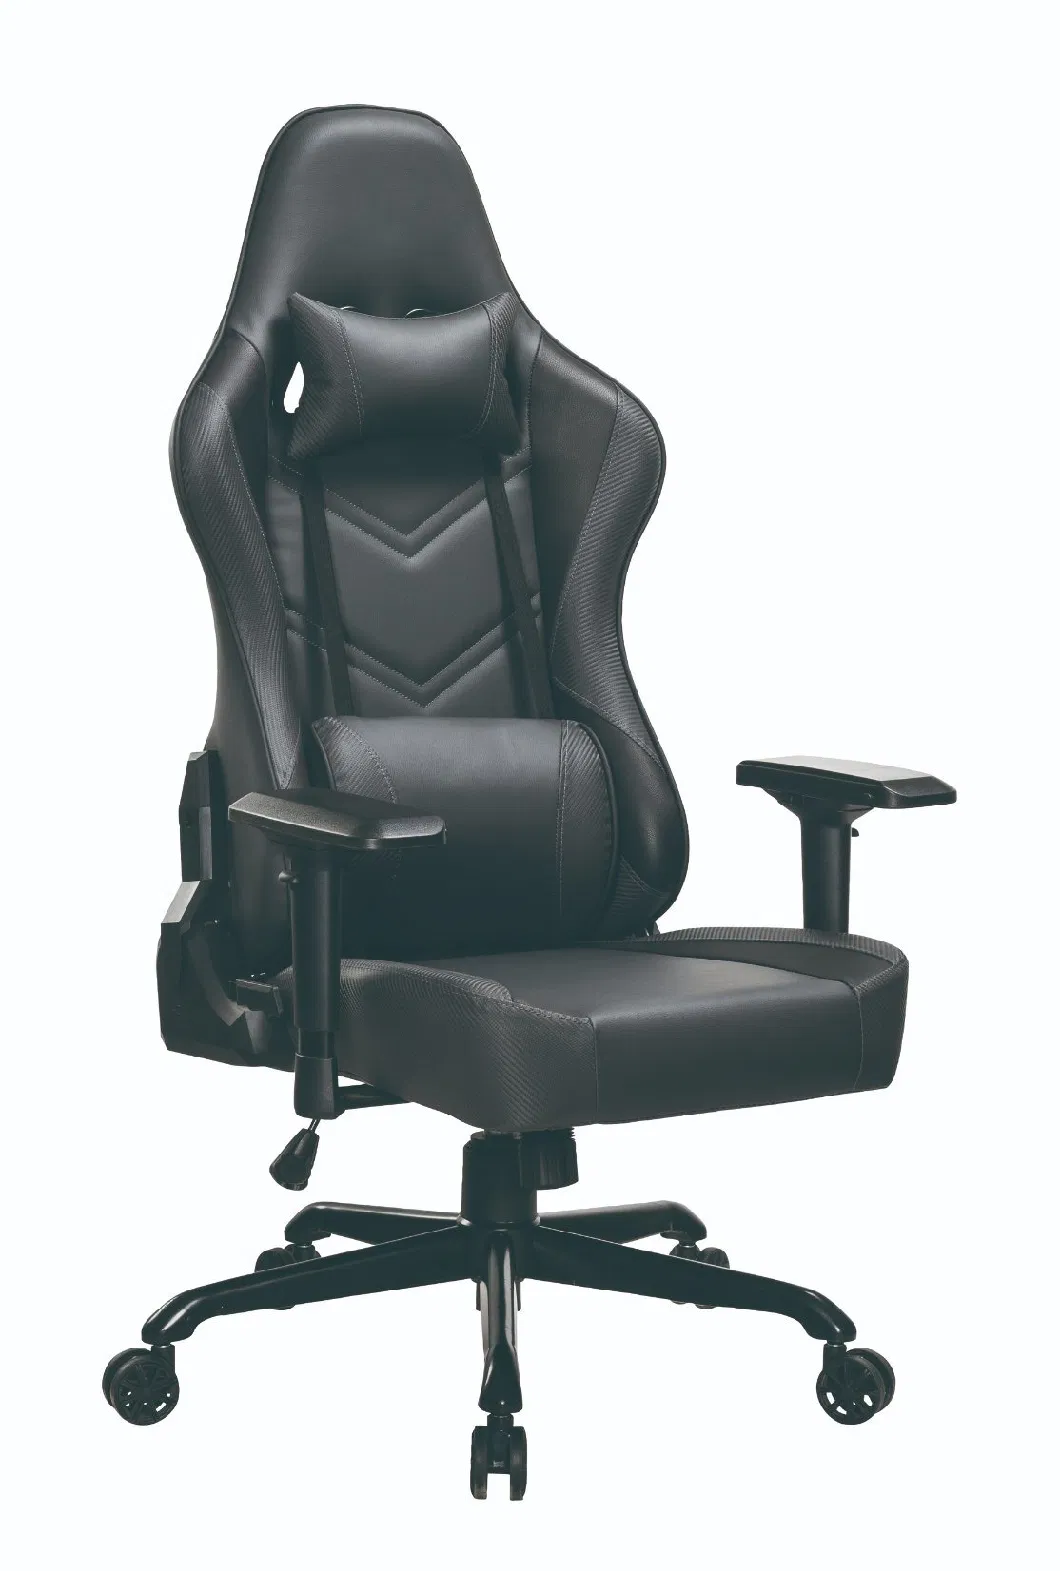 Sidanli Gaming Chairs for Adults Gaming Chair Gamer Chair